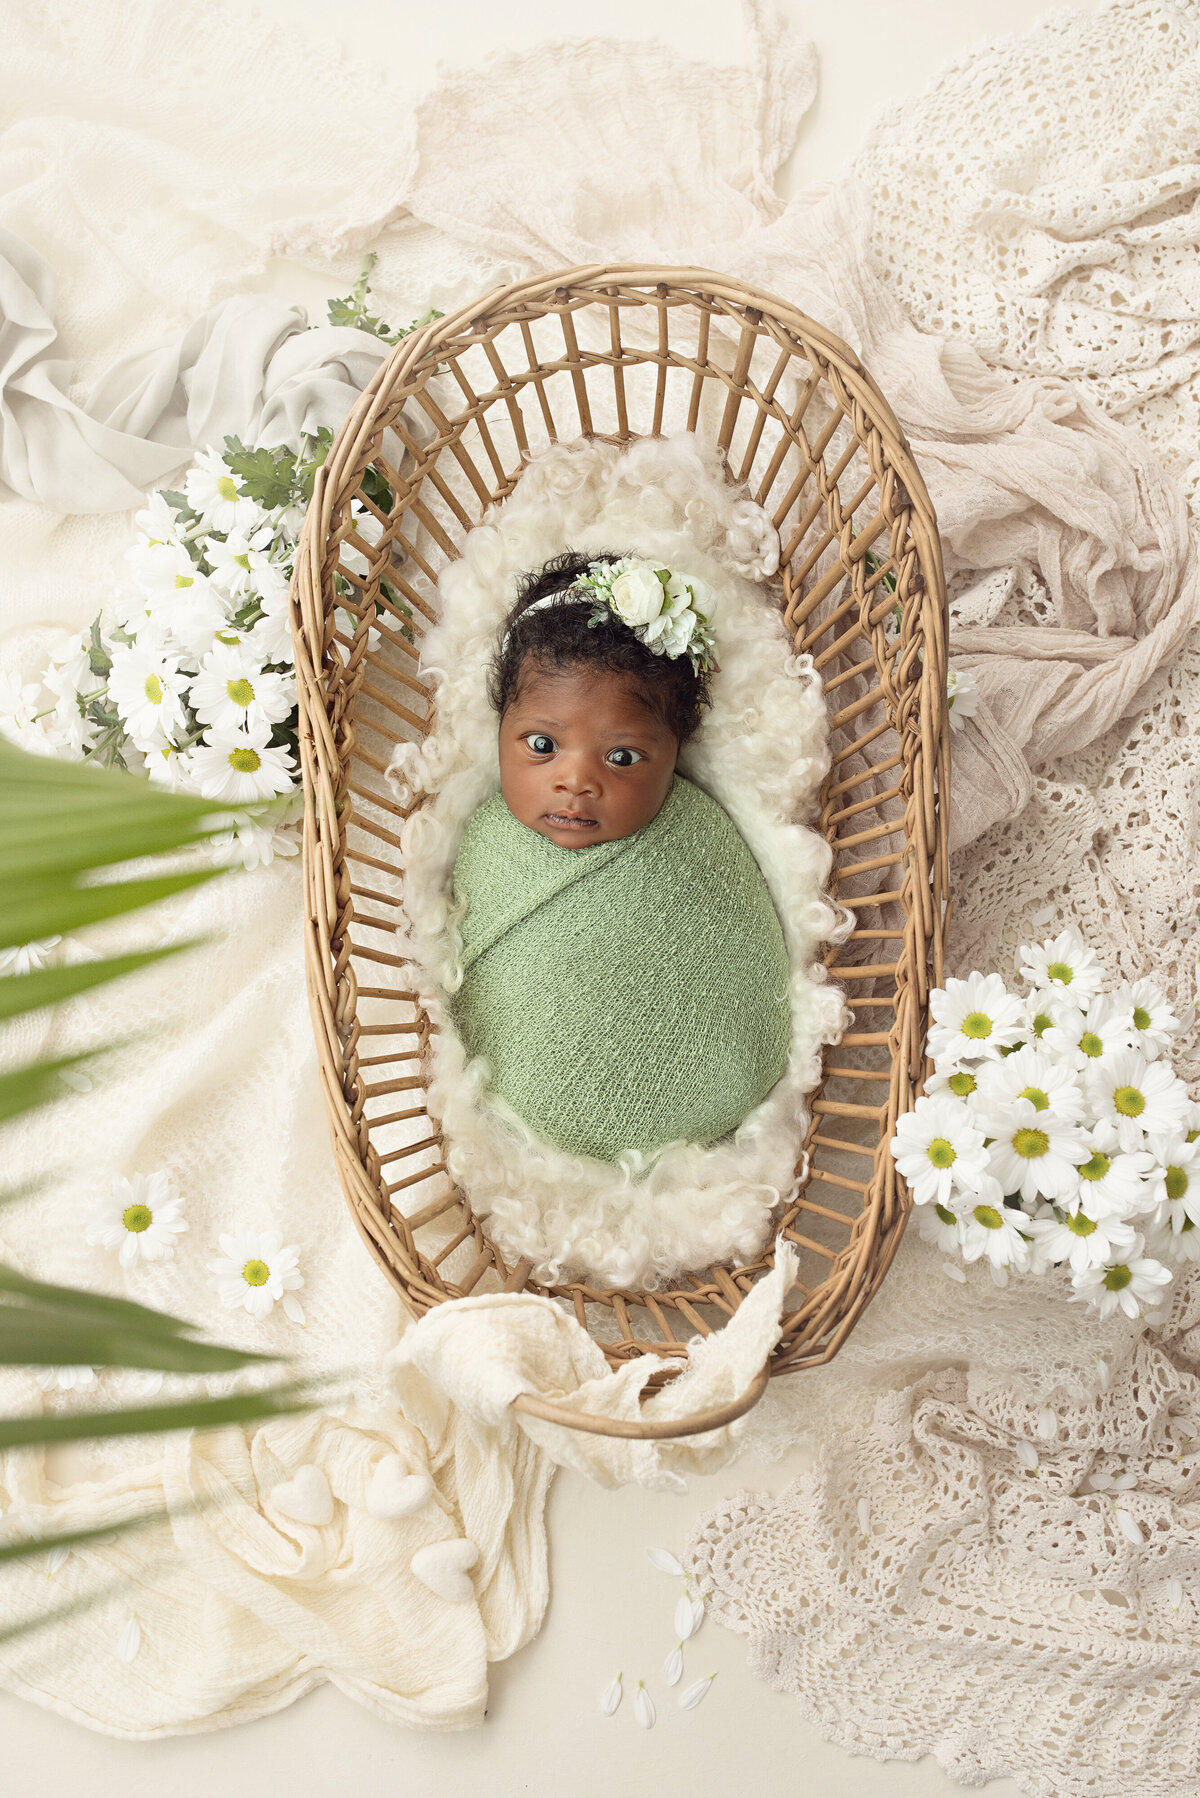 A newborn girl in a green swaddle sleeps in a wicker basket on a lace and fabric covered floor with white daisies